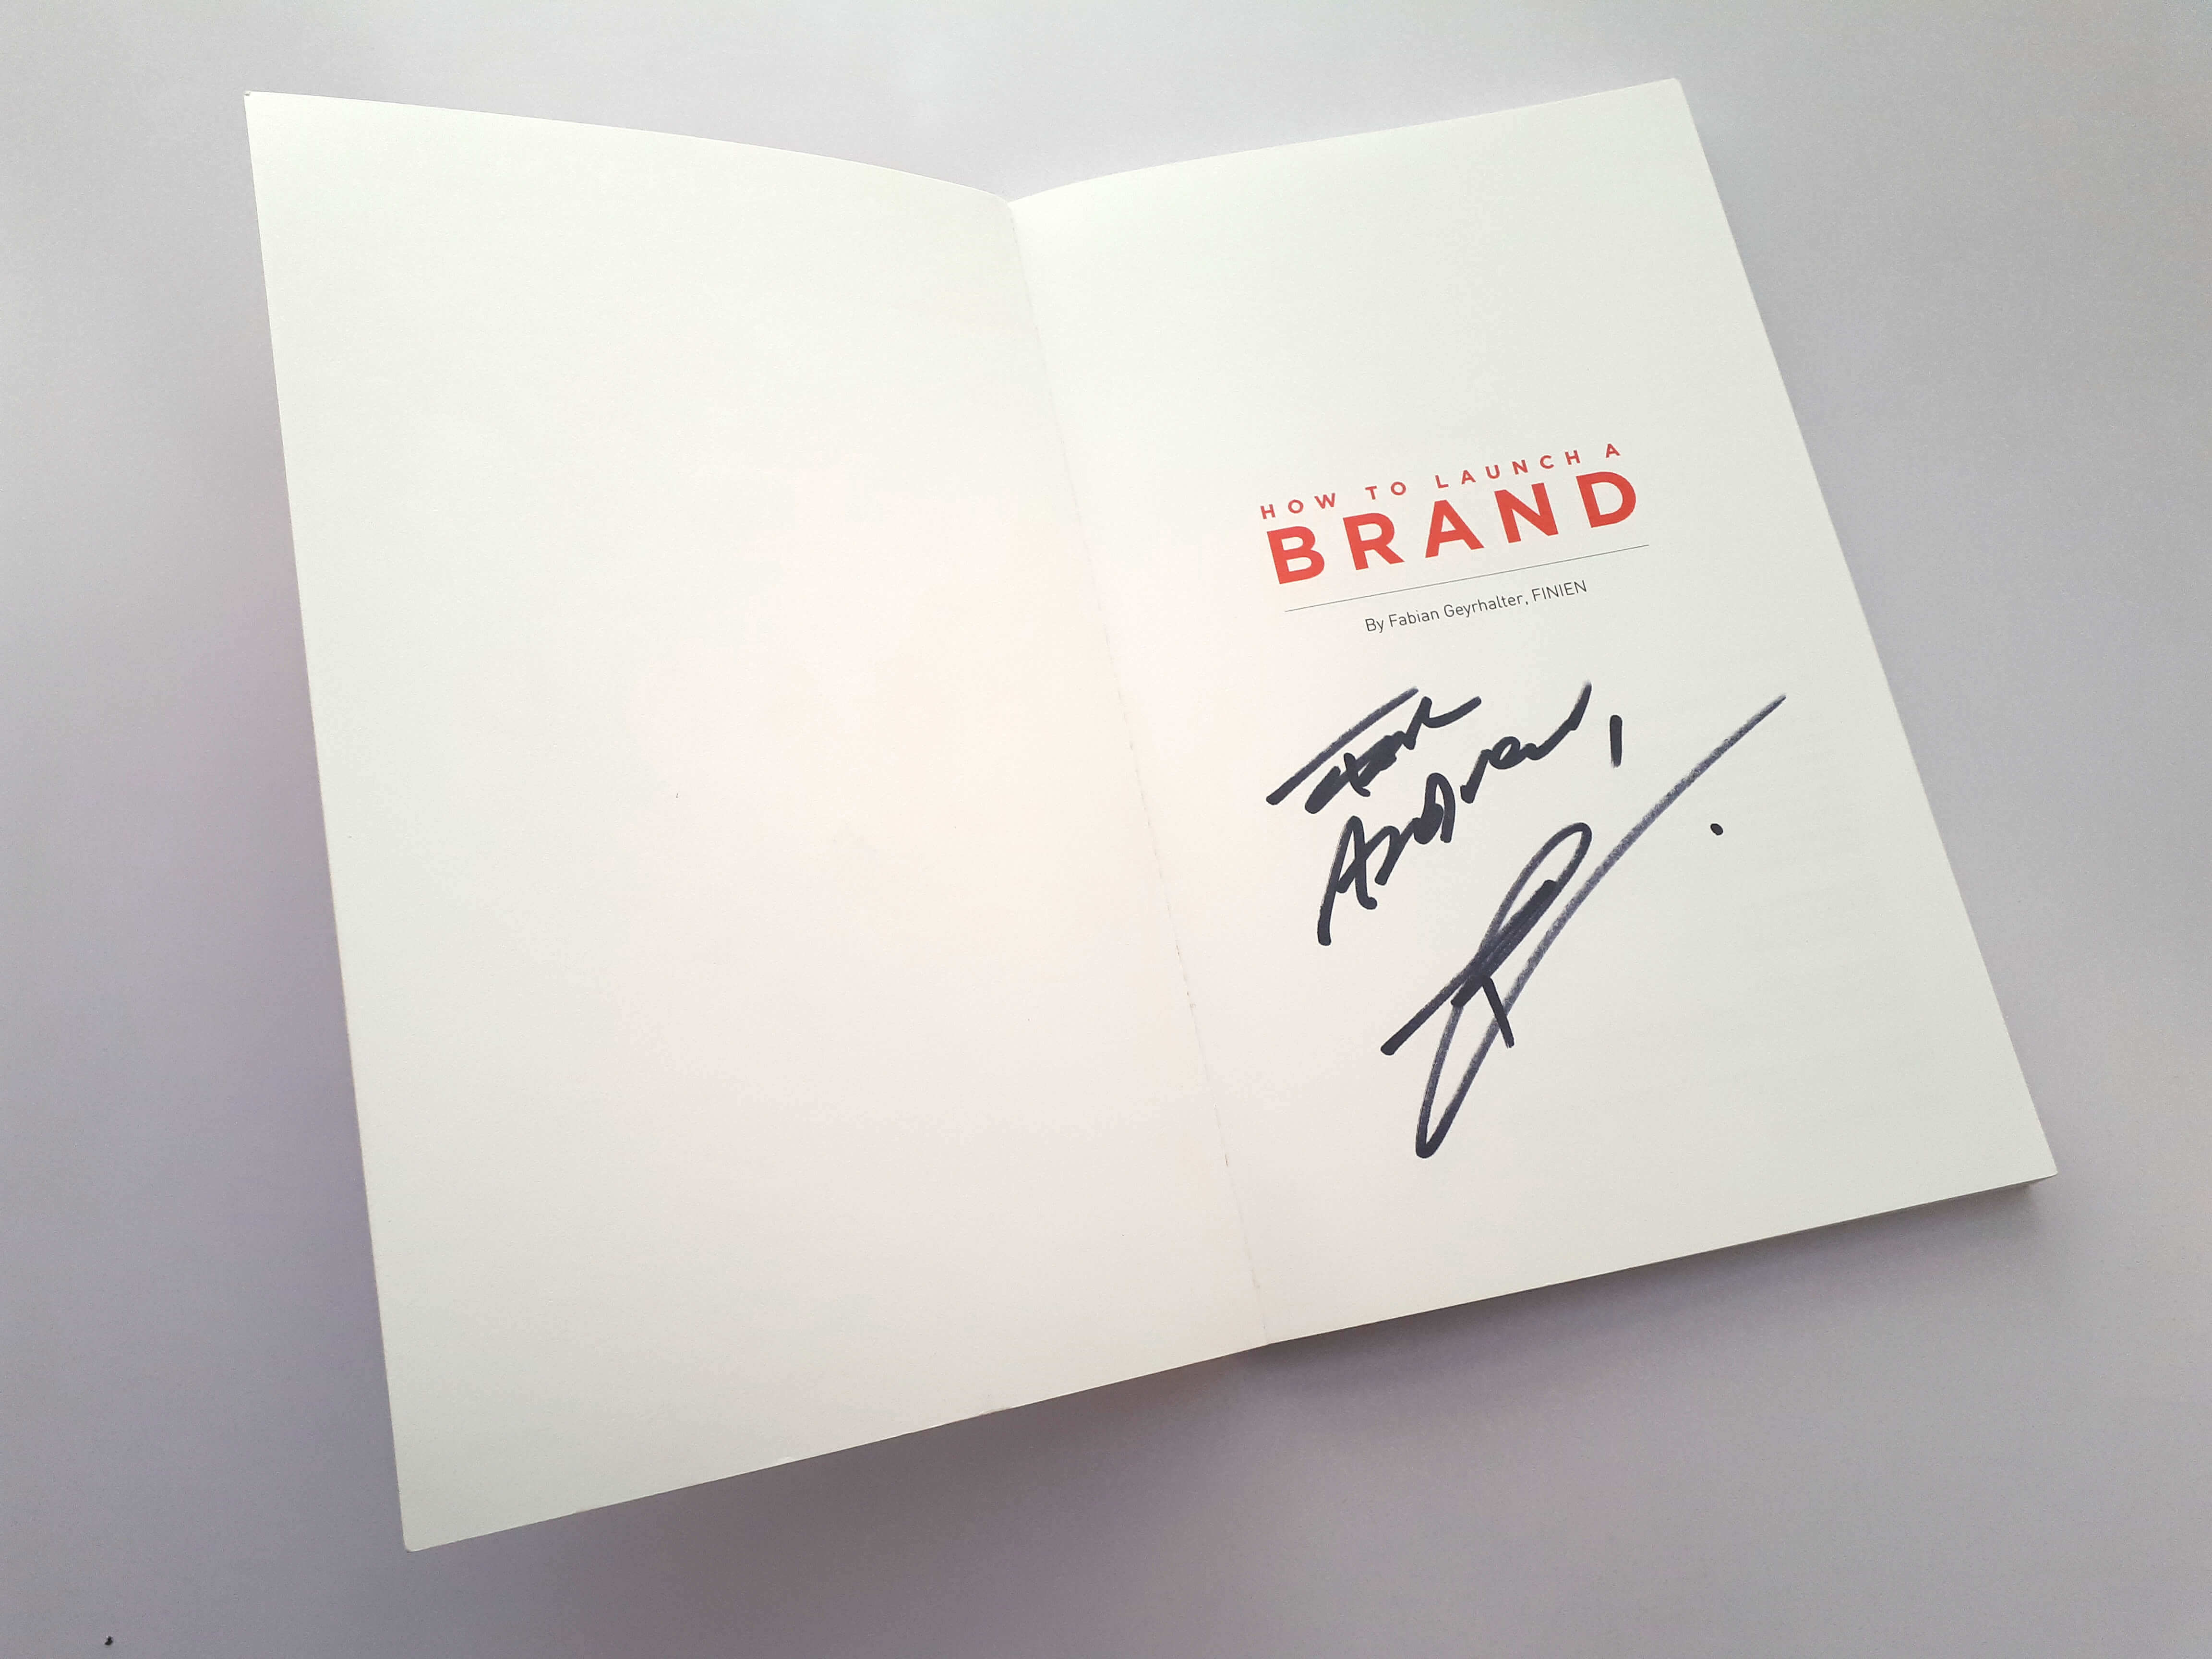 How to launch a brand by Fabian Geyrhalter